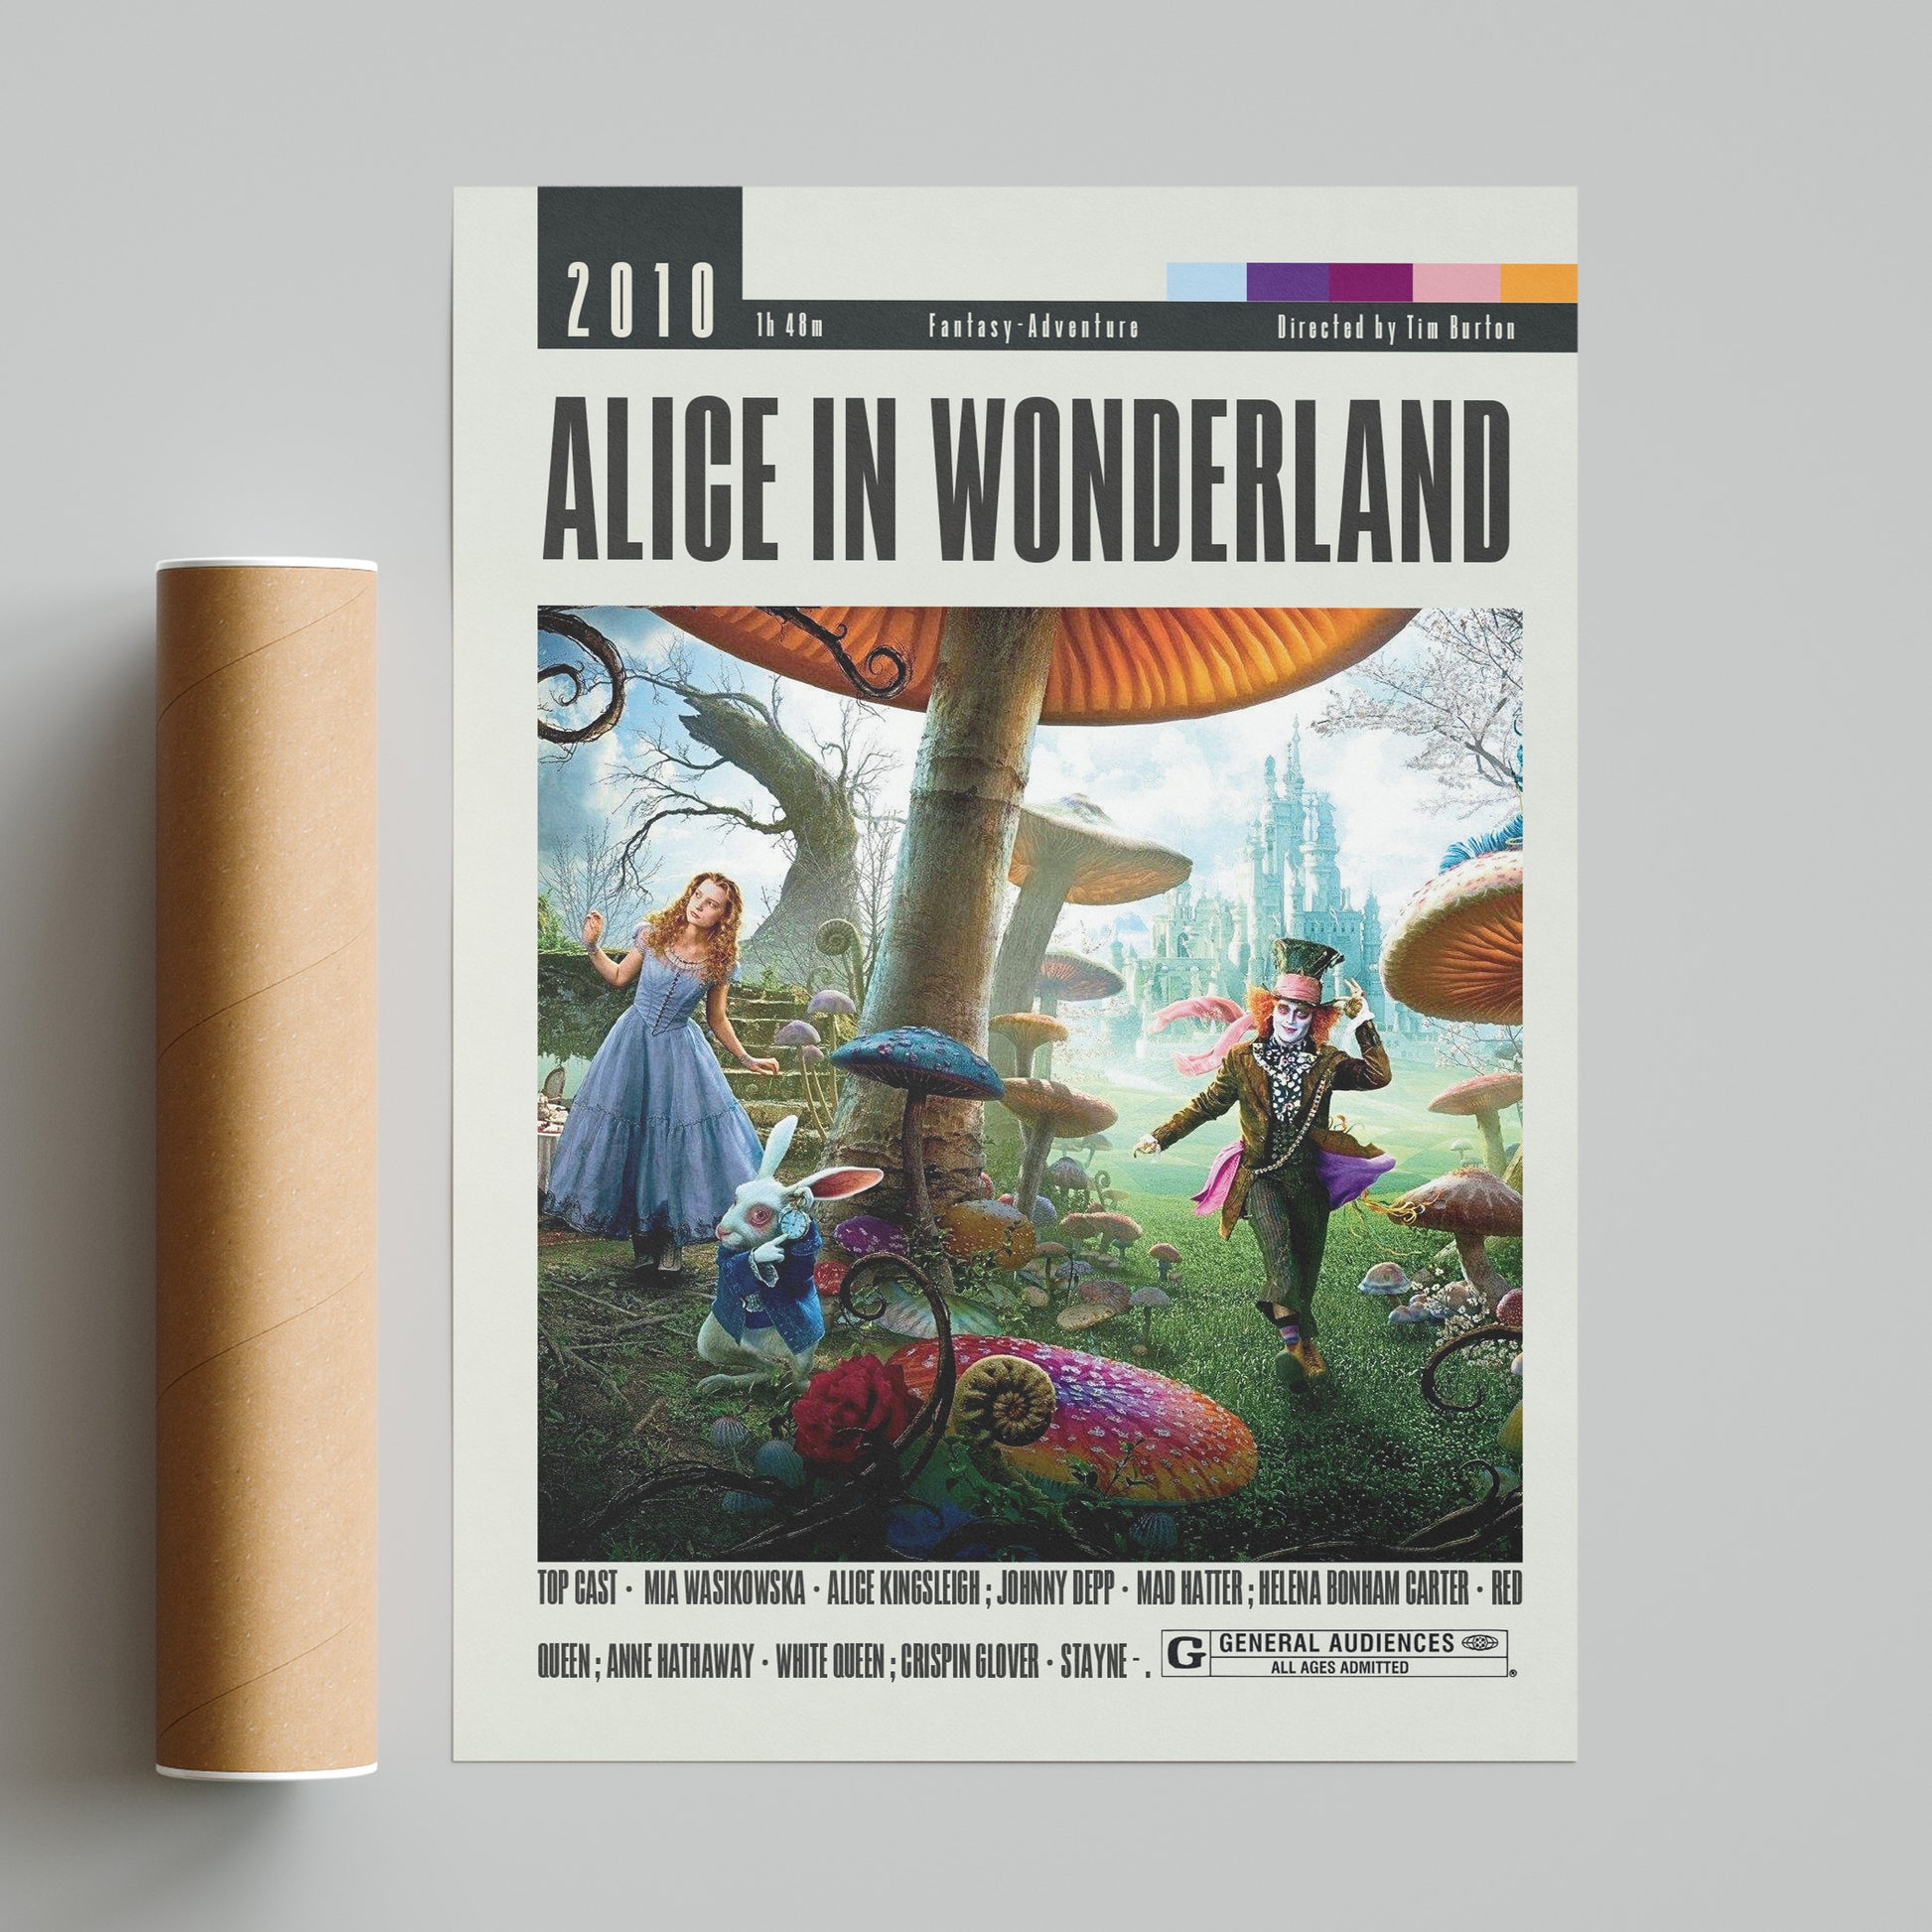 Discover the magic of Tim Burton's classic film with our custom Alice in Wonderland poster. Featuring minimalist vintage art, this high-quality print will transport you to Wonderland. Available in various sizes, this wall art decor is a perfect addition to any movie buff's collection. Get your hands on one of the best movie prints of all time.